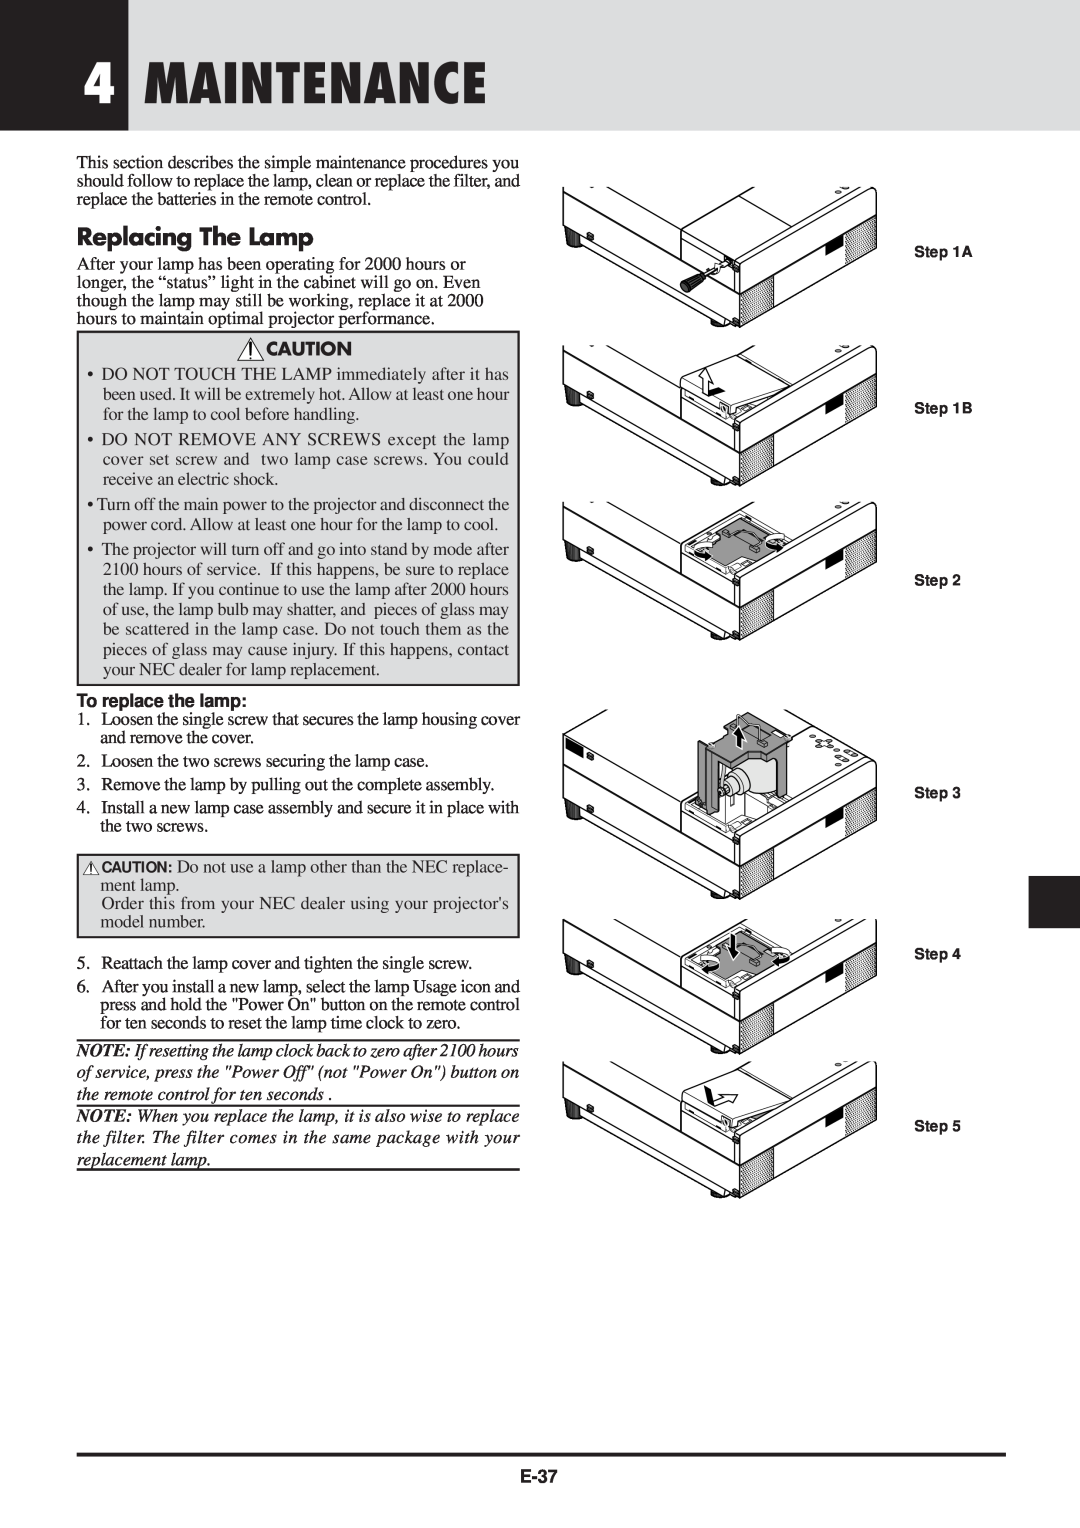 NEC MT830 user manual 4MAINTENANCE, Replacing The Lamp, To replace the lamp, A B Step Step Step Step, E-37 